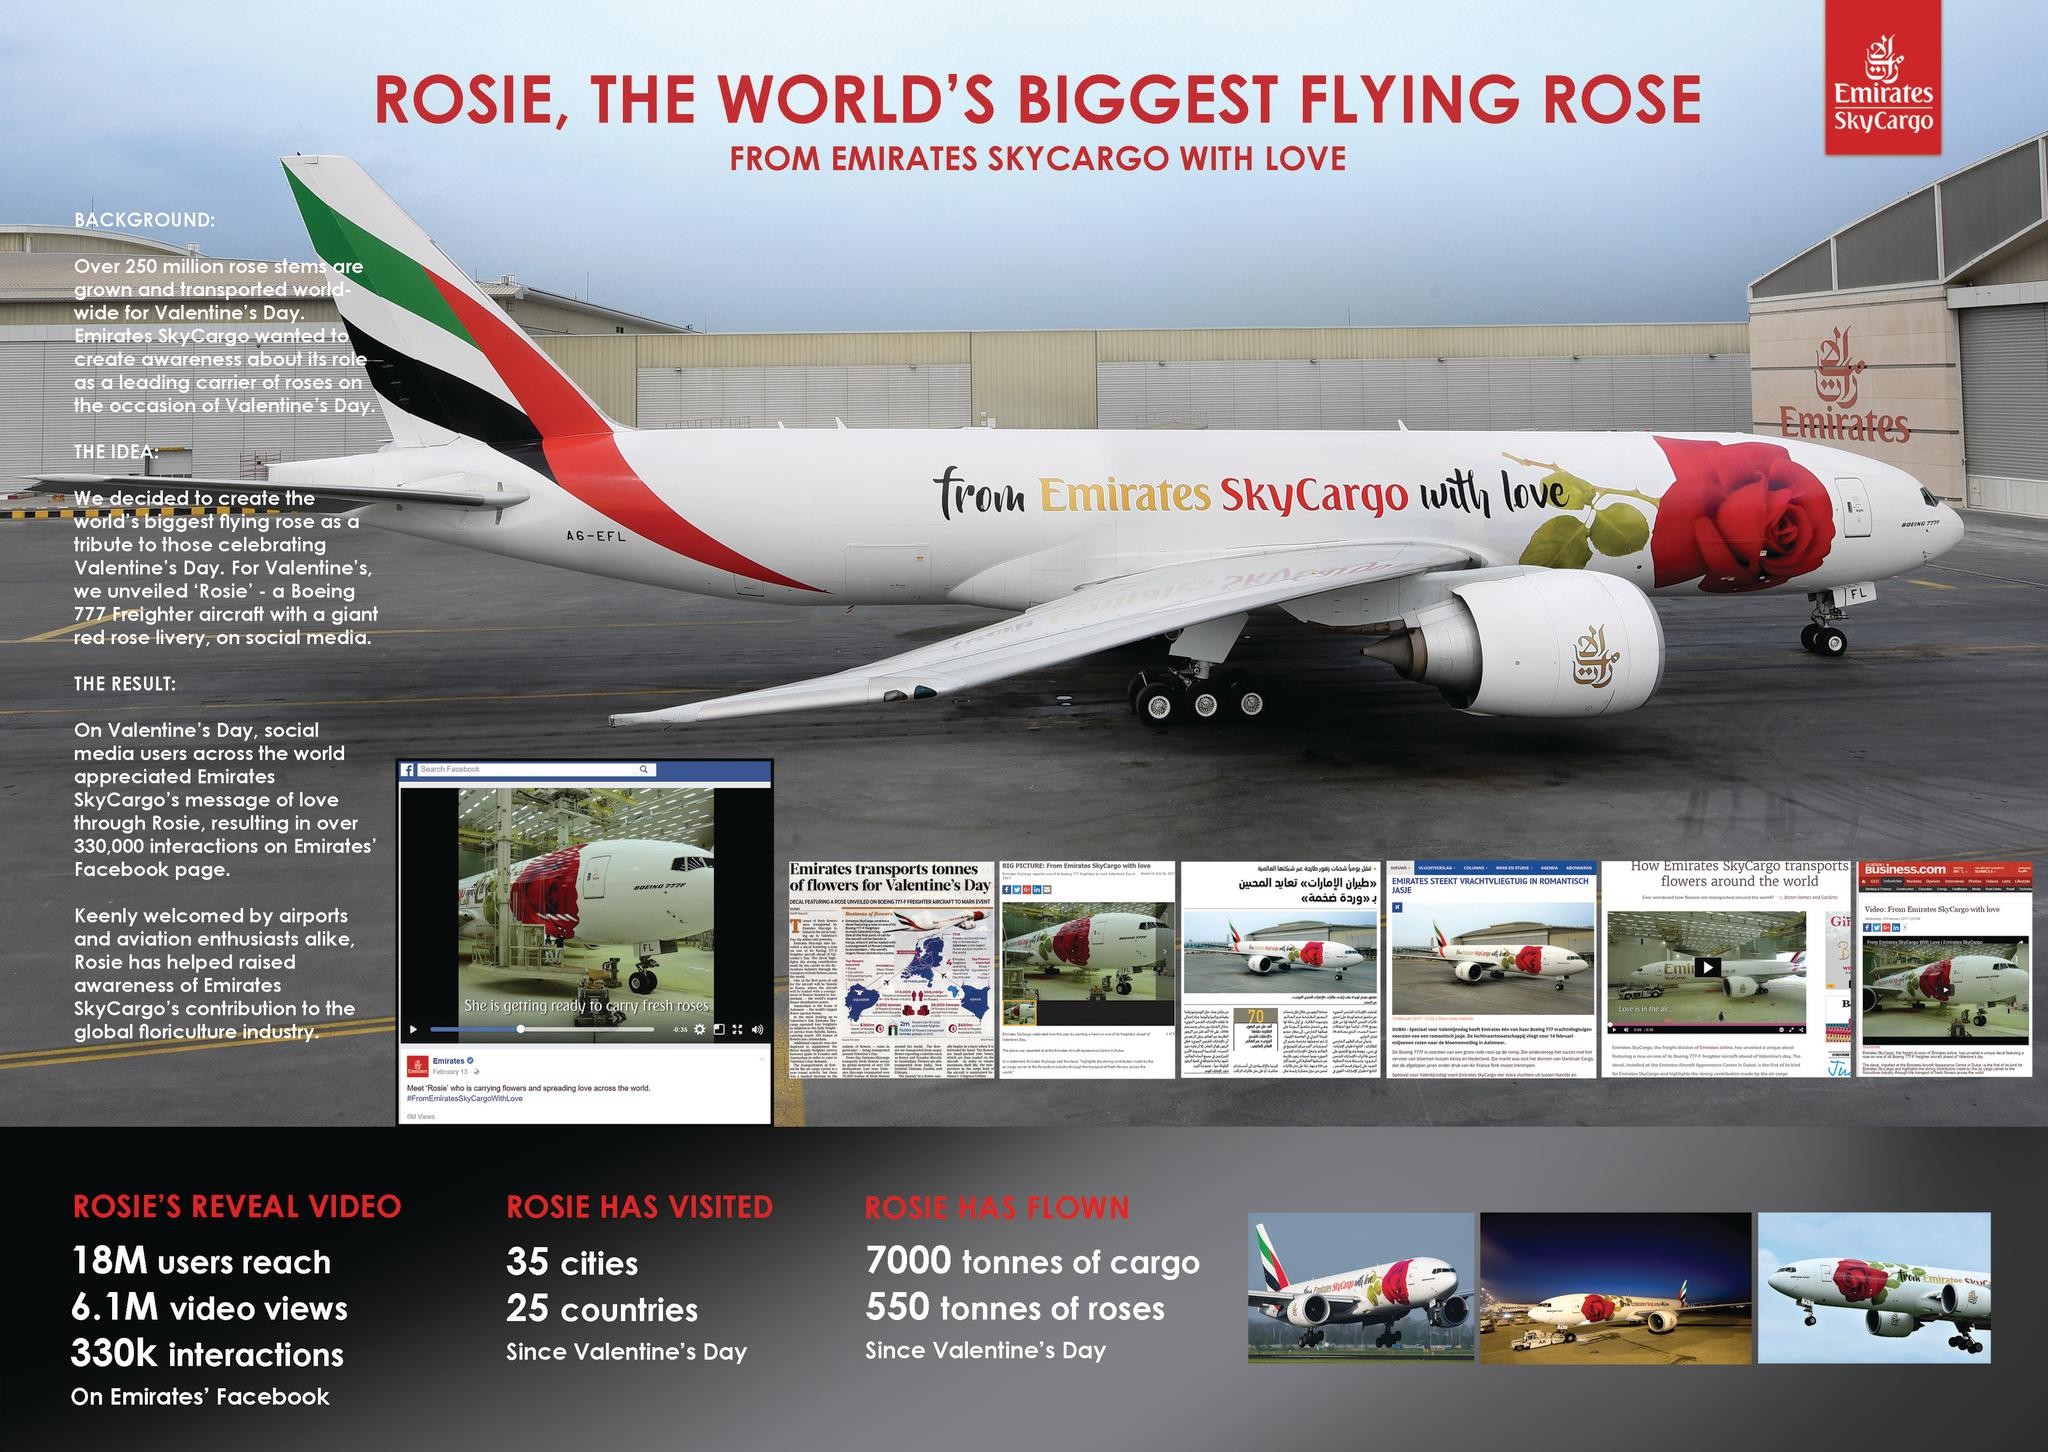 Rosie - The world's biggest flying rose